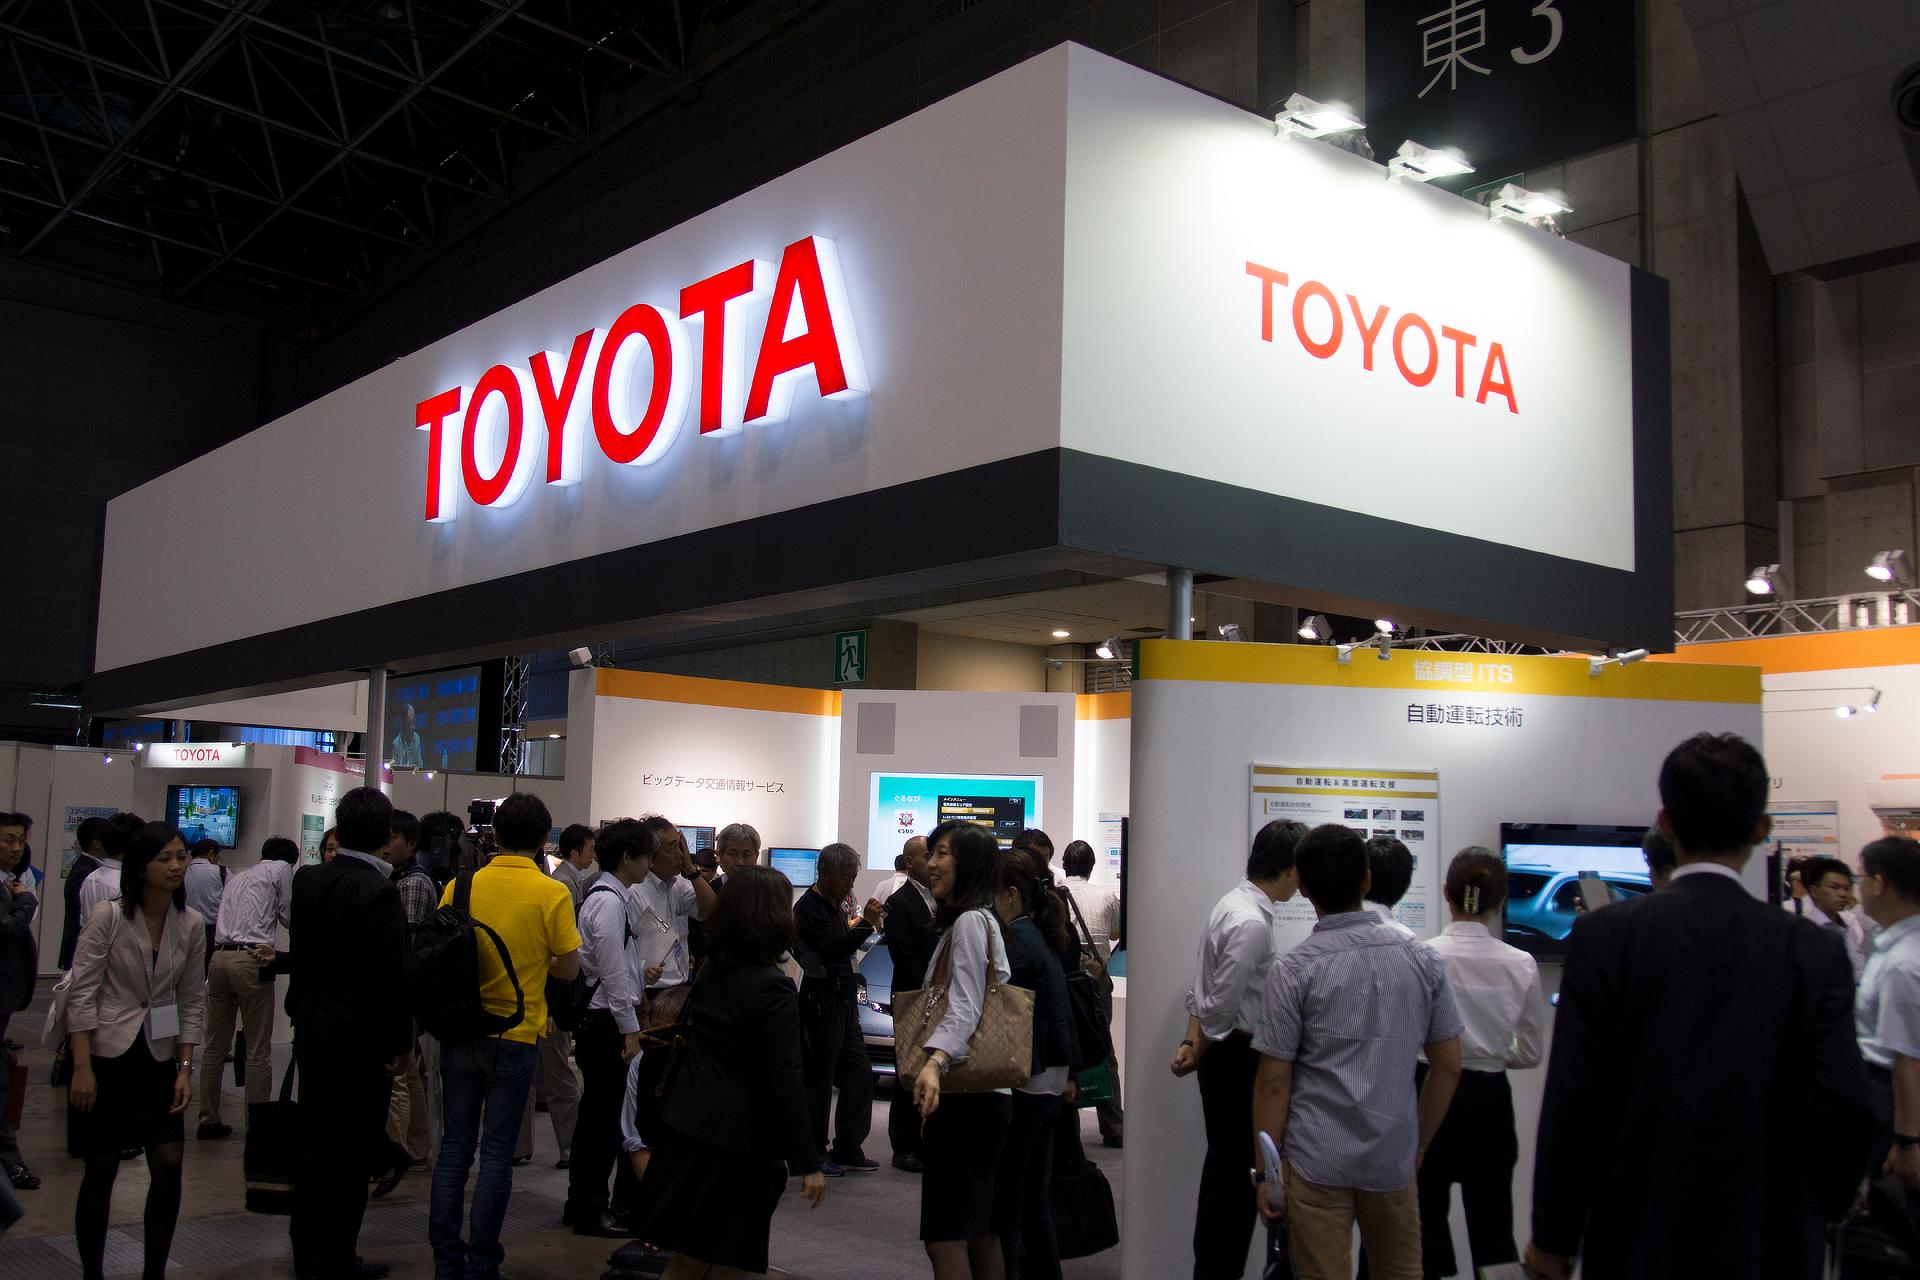 Toyota's booth at Smart Community Japan 2014